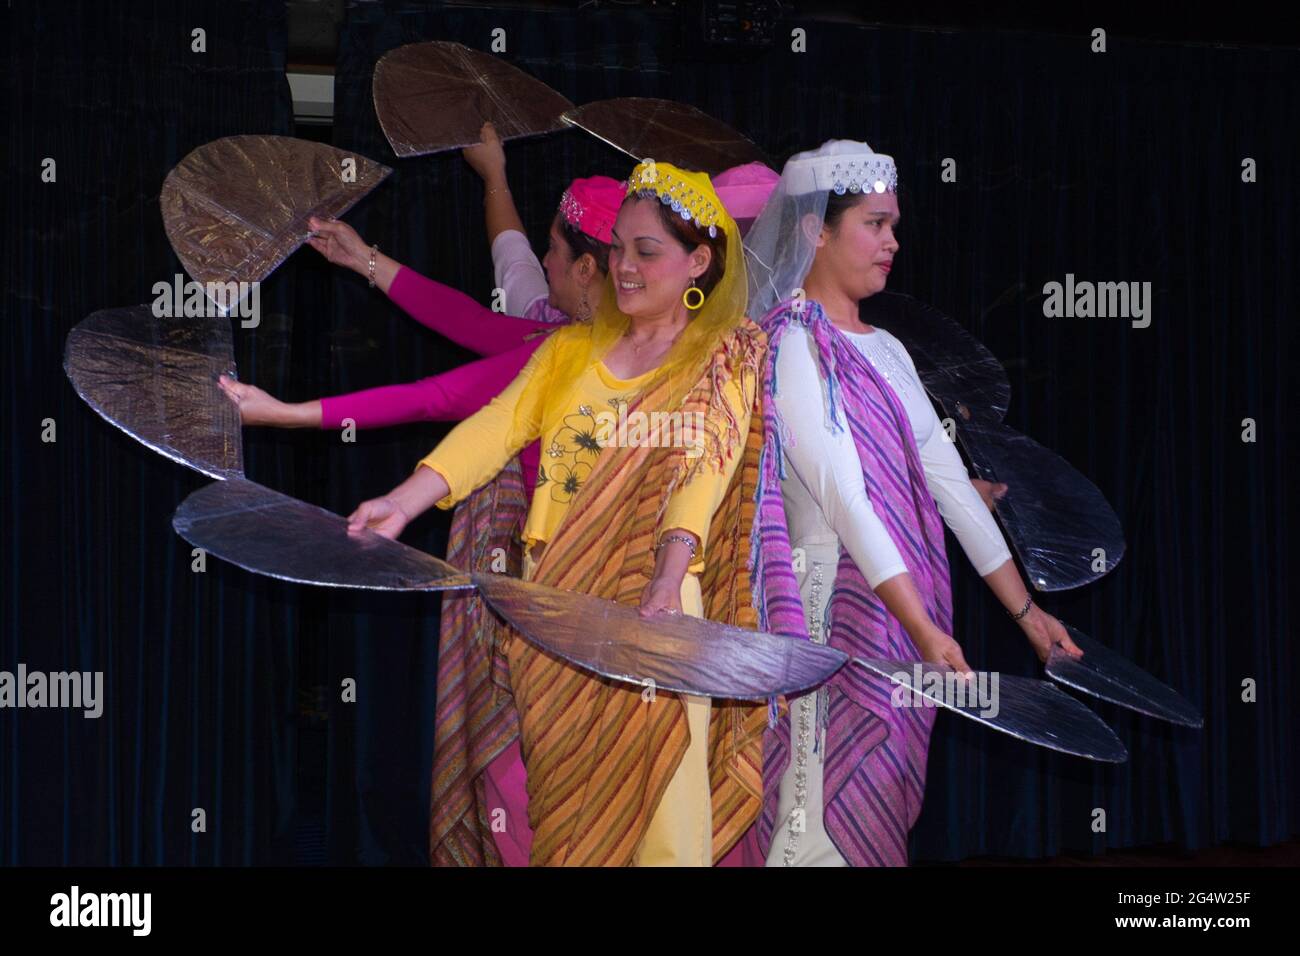 A group of Filipina ladies in saris perform a dance routine on board a cruise ship Stock Photo